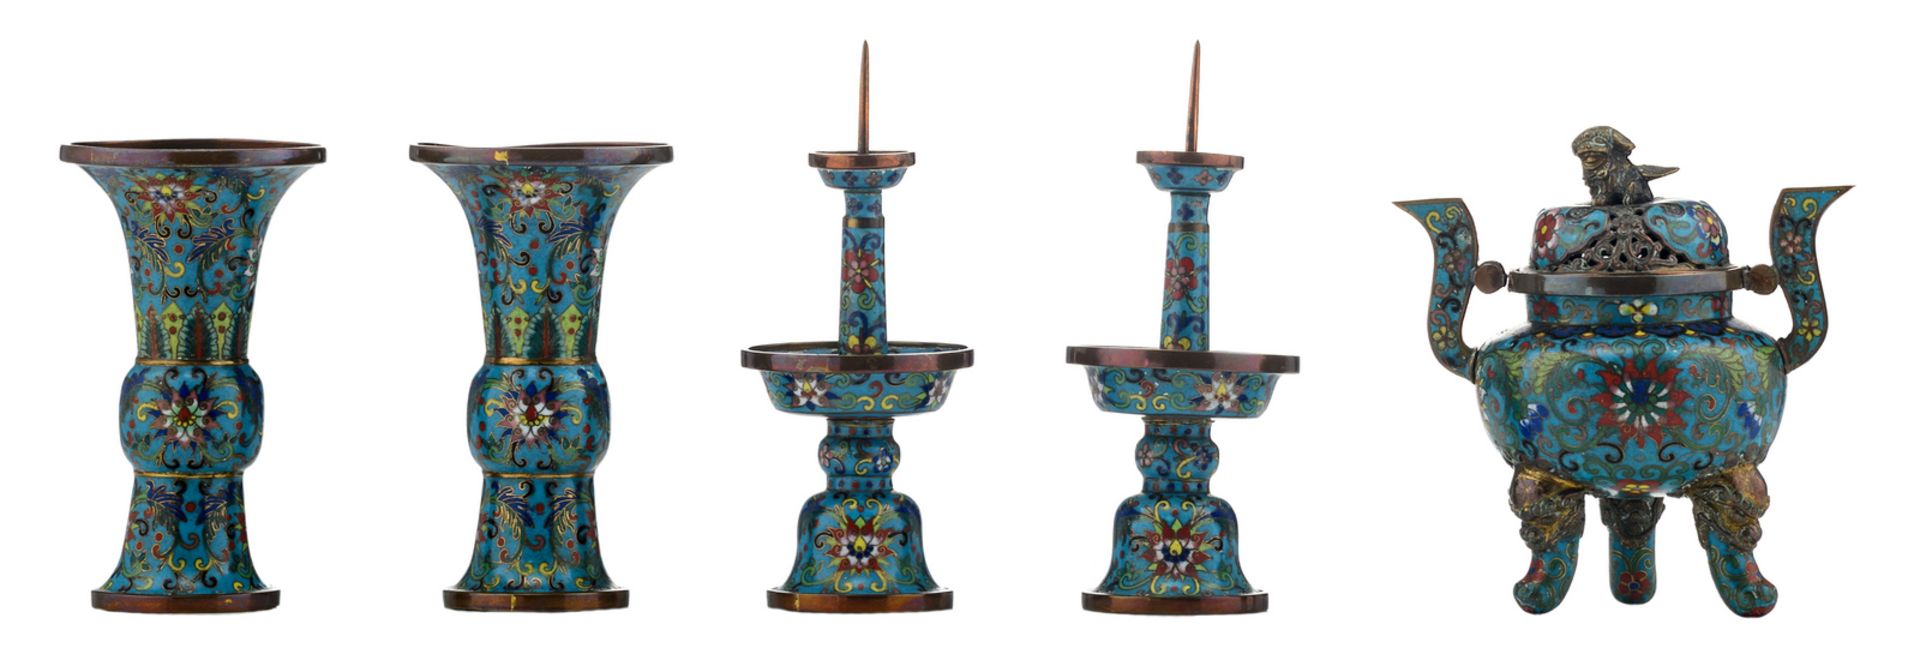 A miniature set of Chinese cloisonné enamel vases, candle sticks and an incense burner, 19thC, H